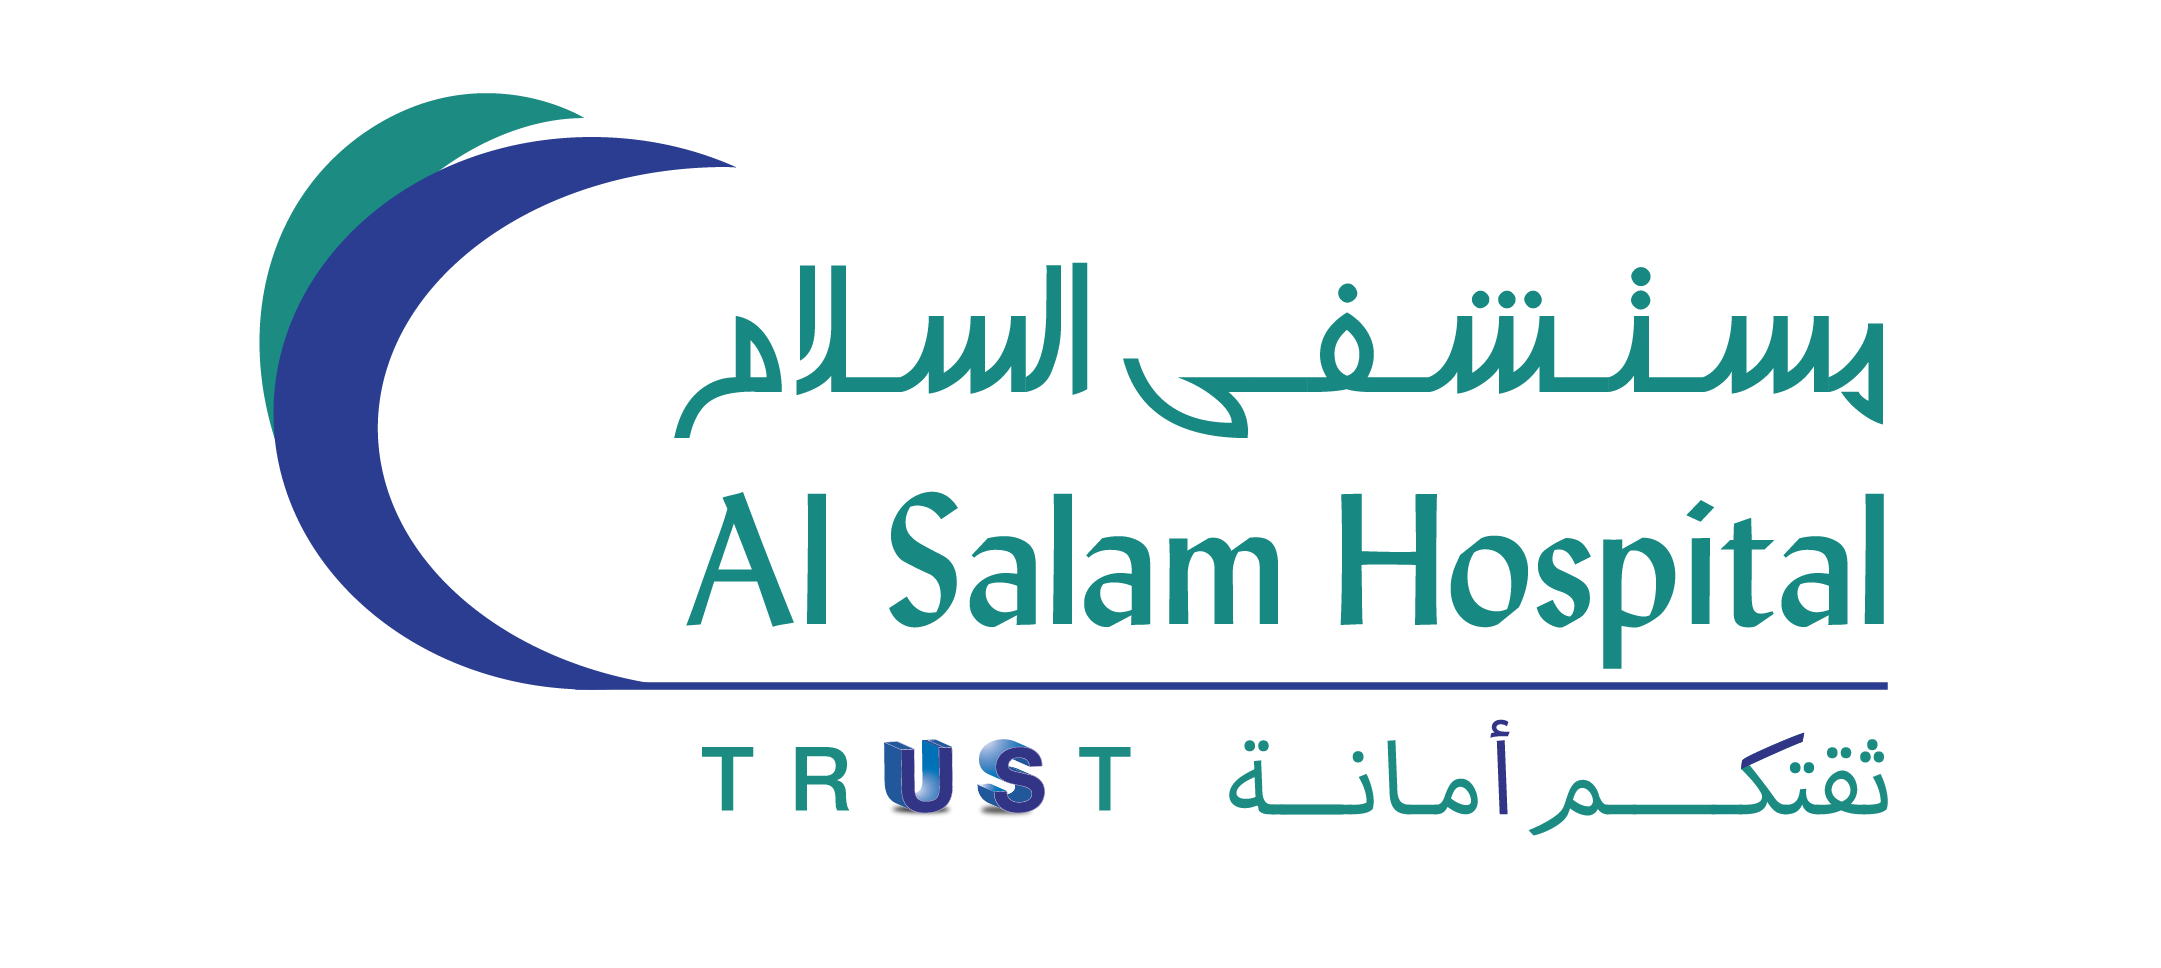 Al Salam Al Assima Hospital: Leader of Excellence in Health Care